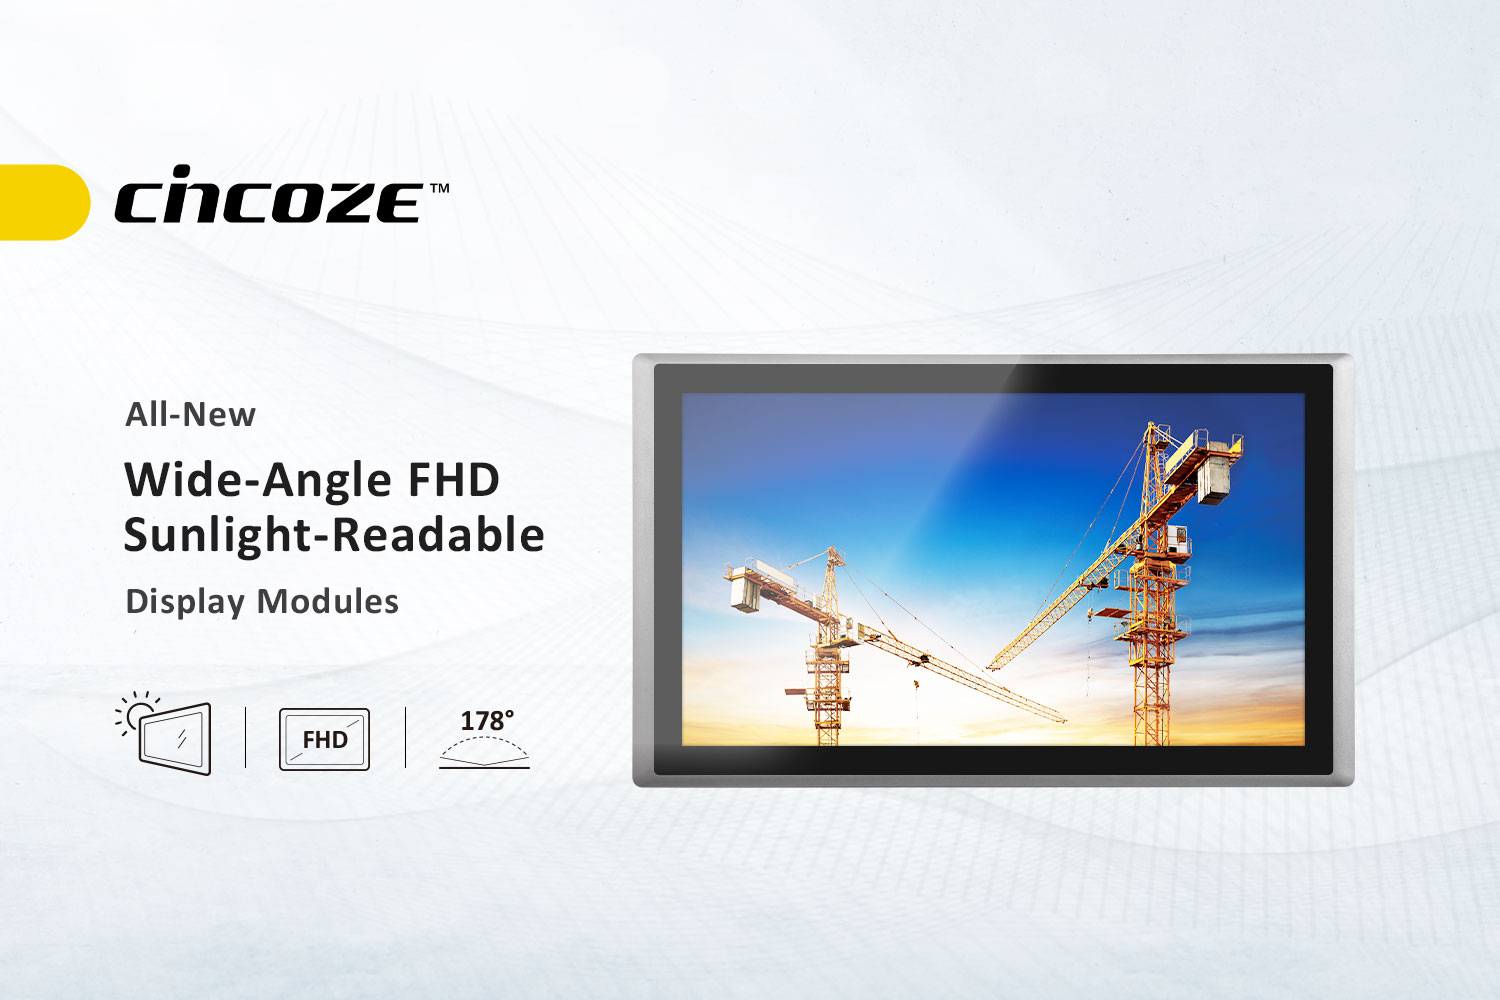 1.Cincoze All-New Wide-Angle FHD Sunlight-Readable Display Modules.jpg